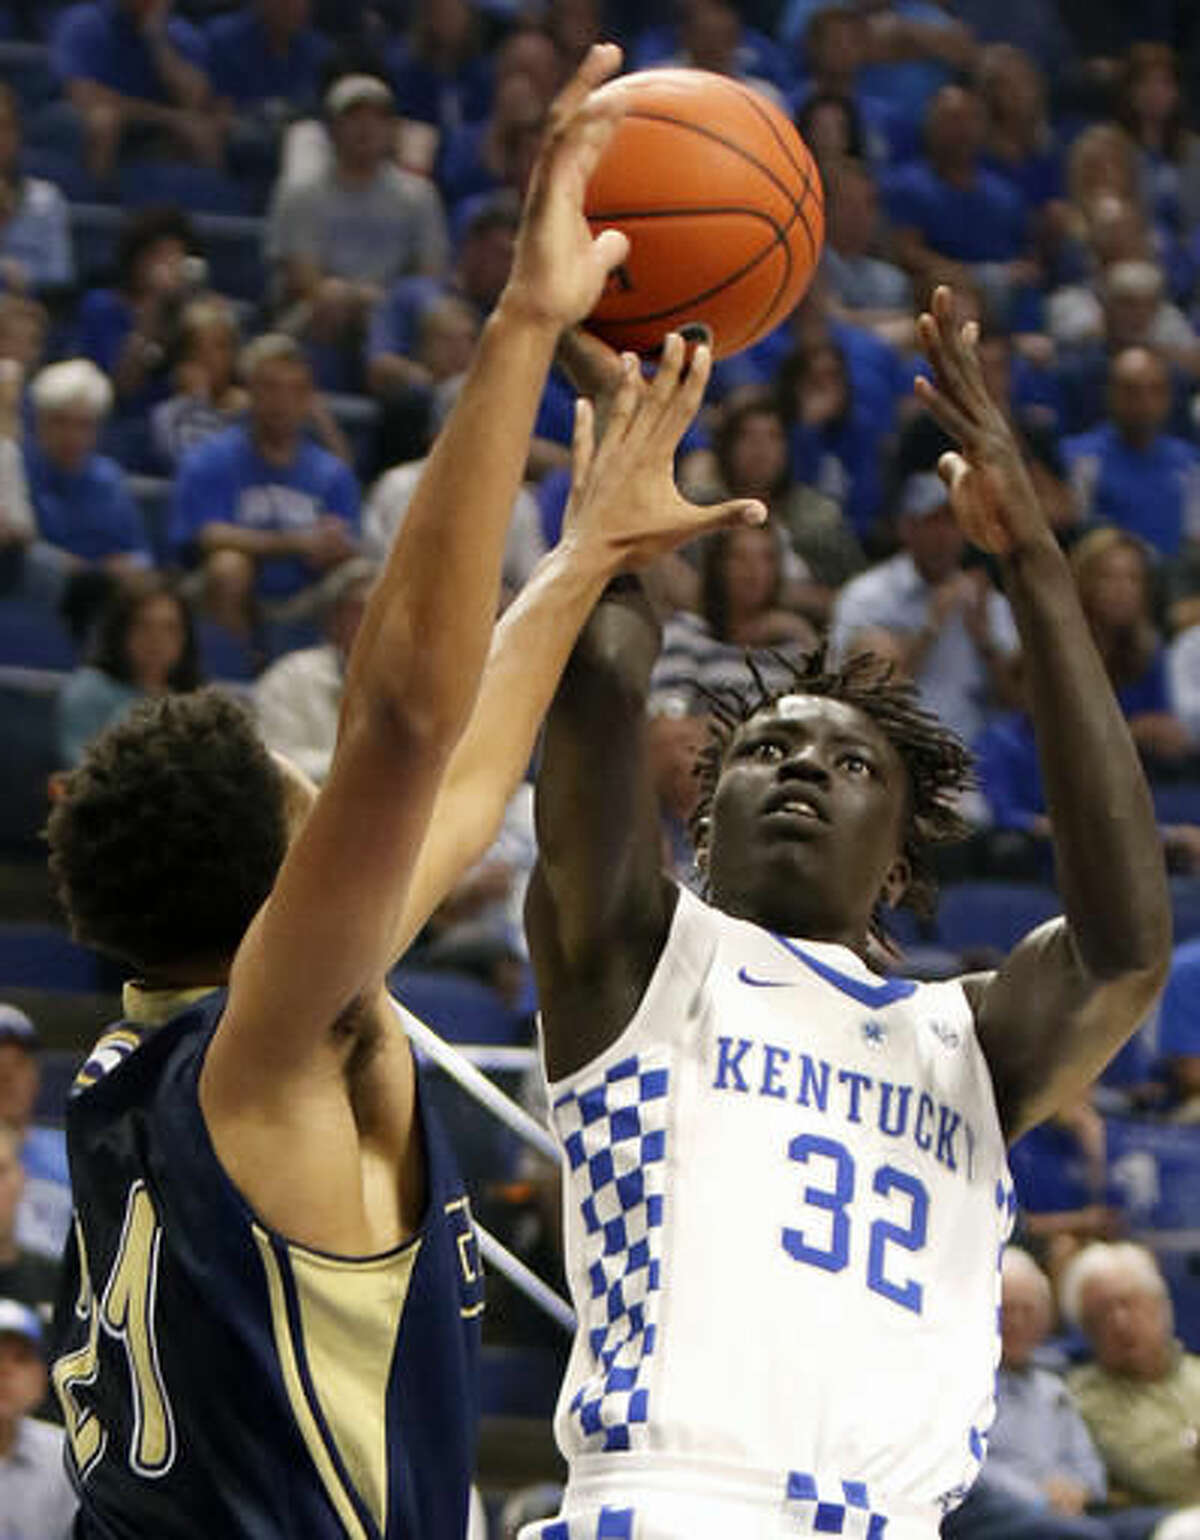 FILE - In this Oct. 30, 2016, file photo, Kentucky's Wenyen Gabriel (32) shoots while pressured by Clarion's Justin Grant during the first half of their NCAA college basketball exhibition, in Lexington, Ky. Kentucky’s John Calipari landed five of the nation’s top 24 prospects according to composite rankings of recruiting websites compiled by 247Sports. The new Wildcats include guards De’Aaron Fox, Malik Monk, Bam Adebayo, Wenyen Gabriel and Sacha Killeya-Jones. (AP Photo/James Crisp, File)